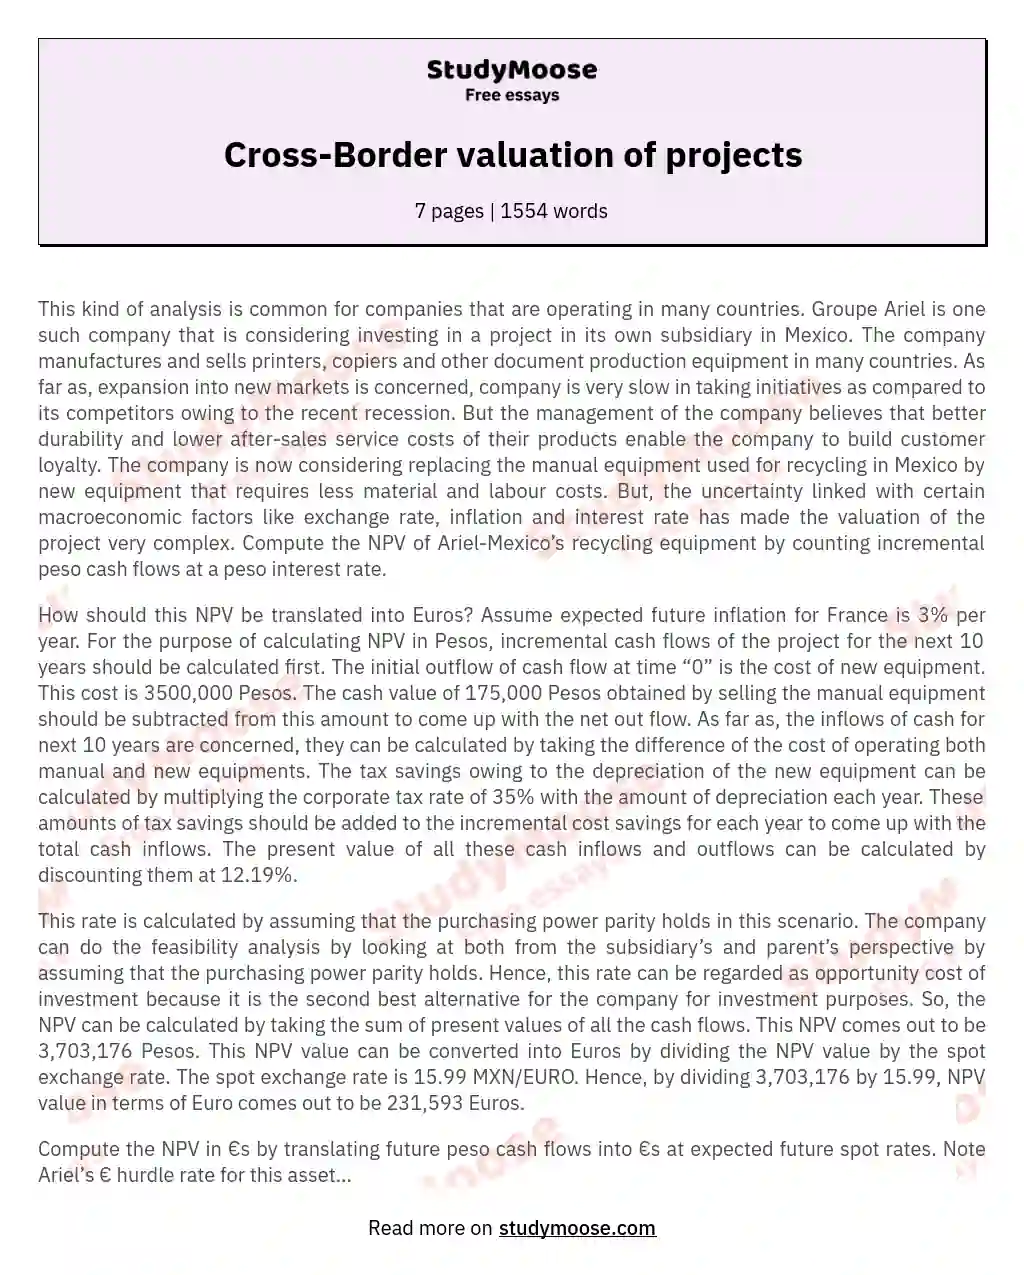 Cross-Border valuation of projects